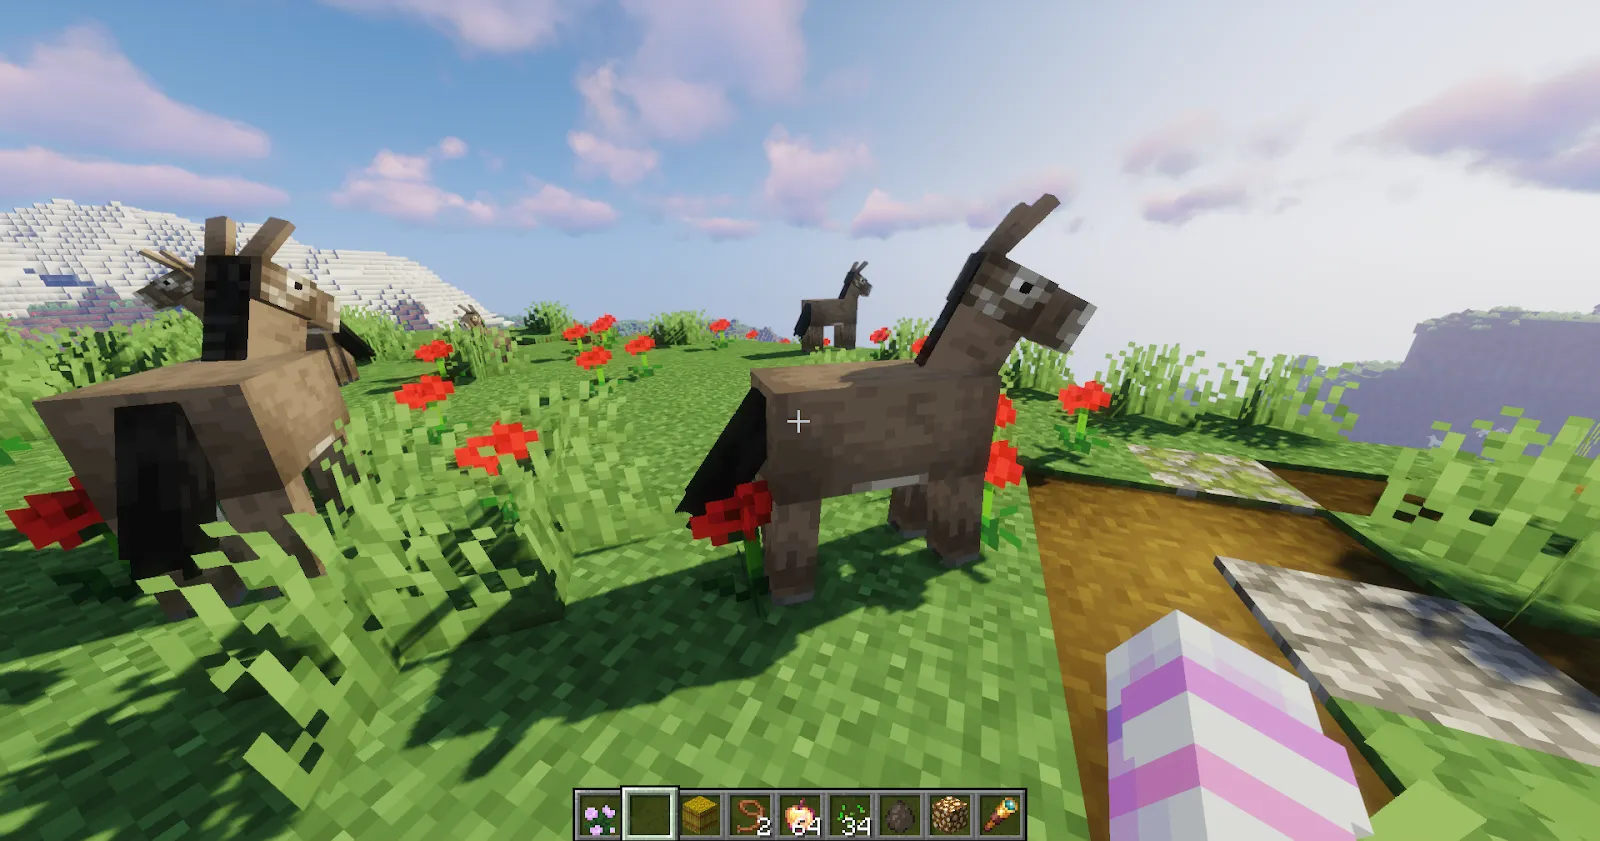 Approaching Minecraft donkey to tame